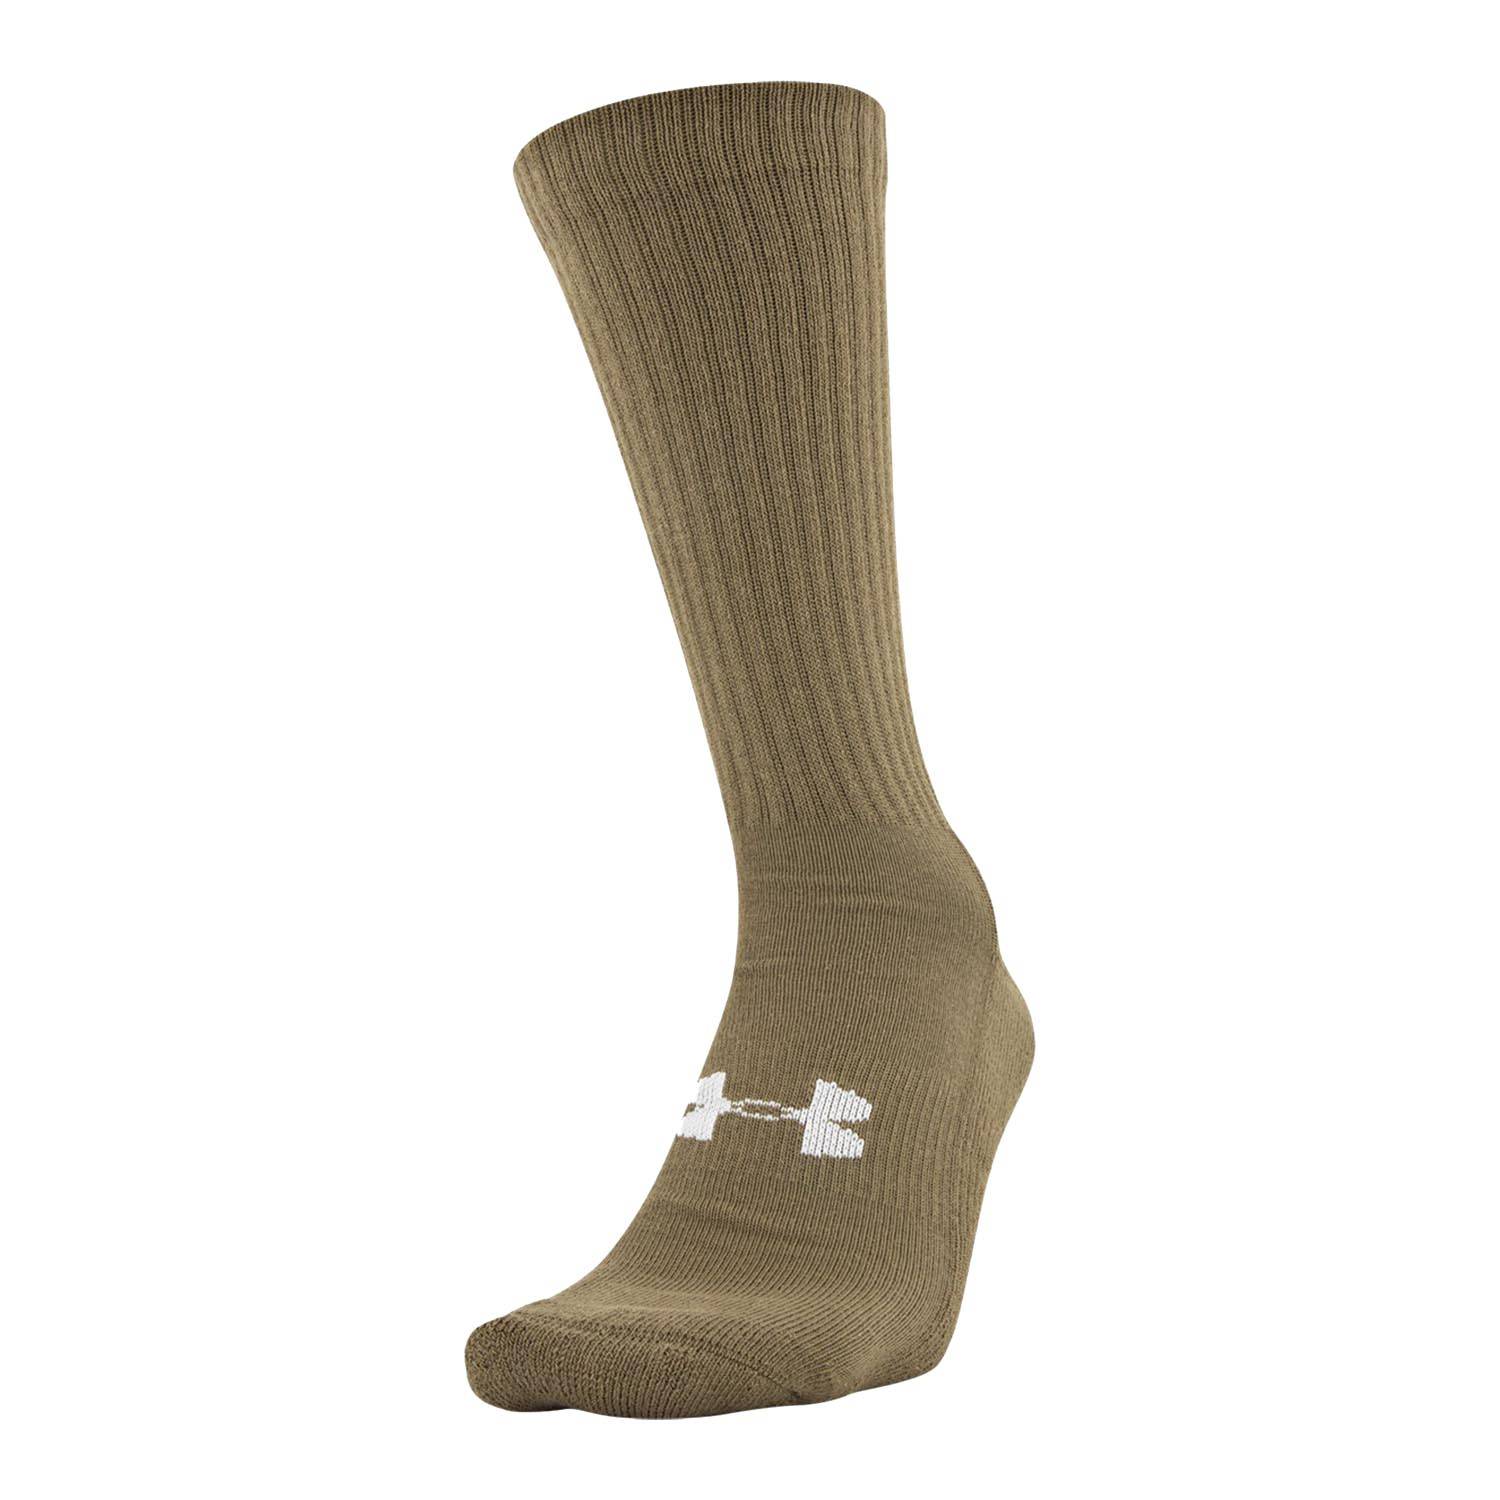 UNDER ARMOUR TACTICAL BOOT SOCKS